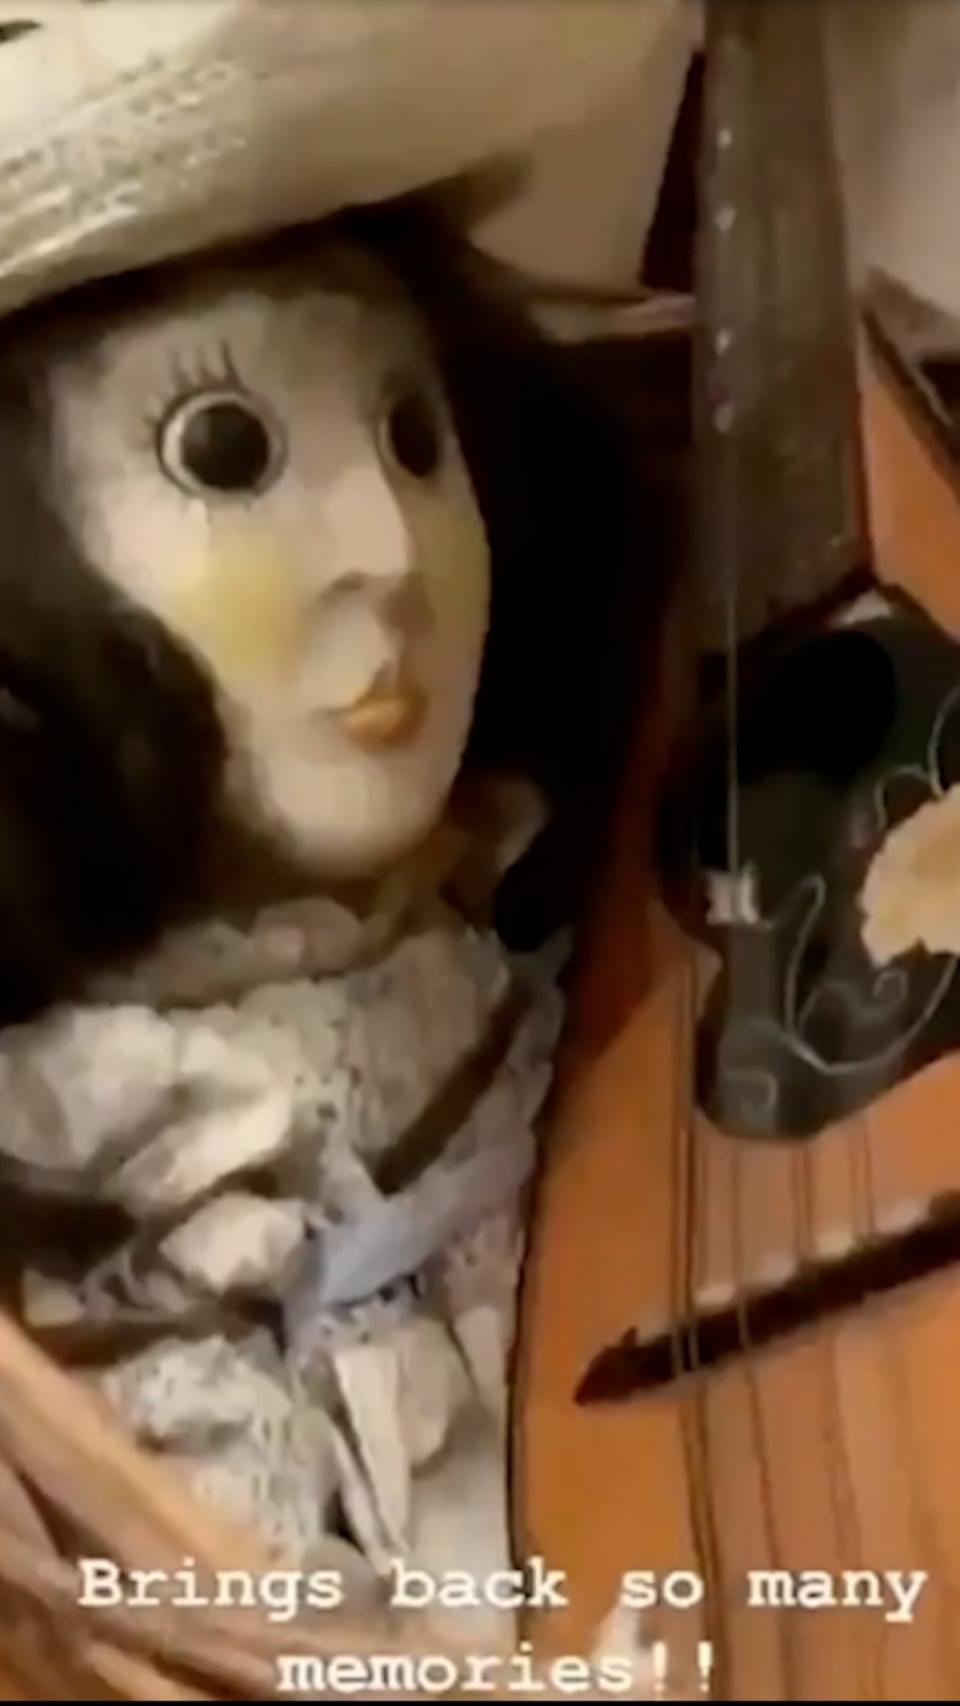 Victoria Beckham zoomed in on some old dolls in the bedroom (Instagram)